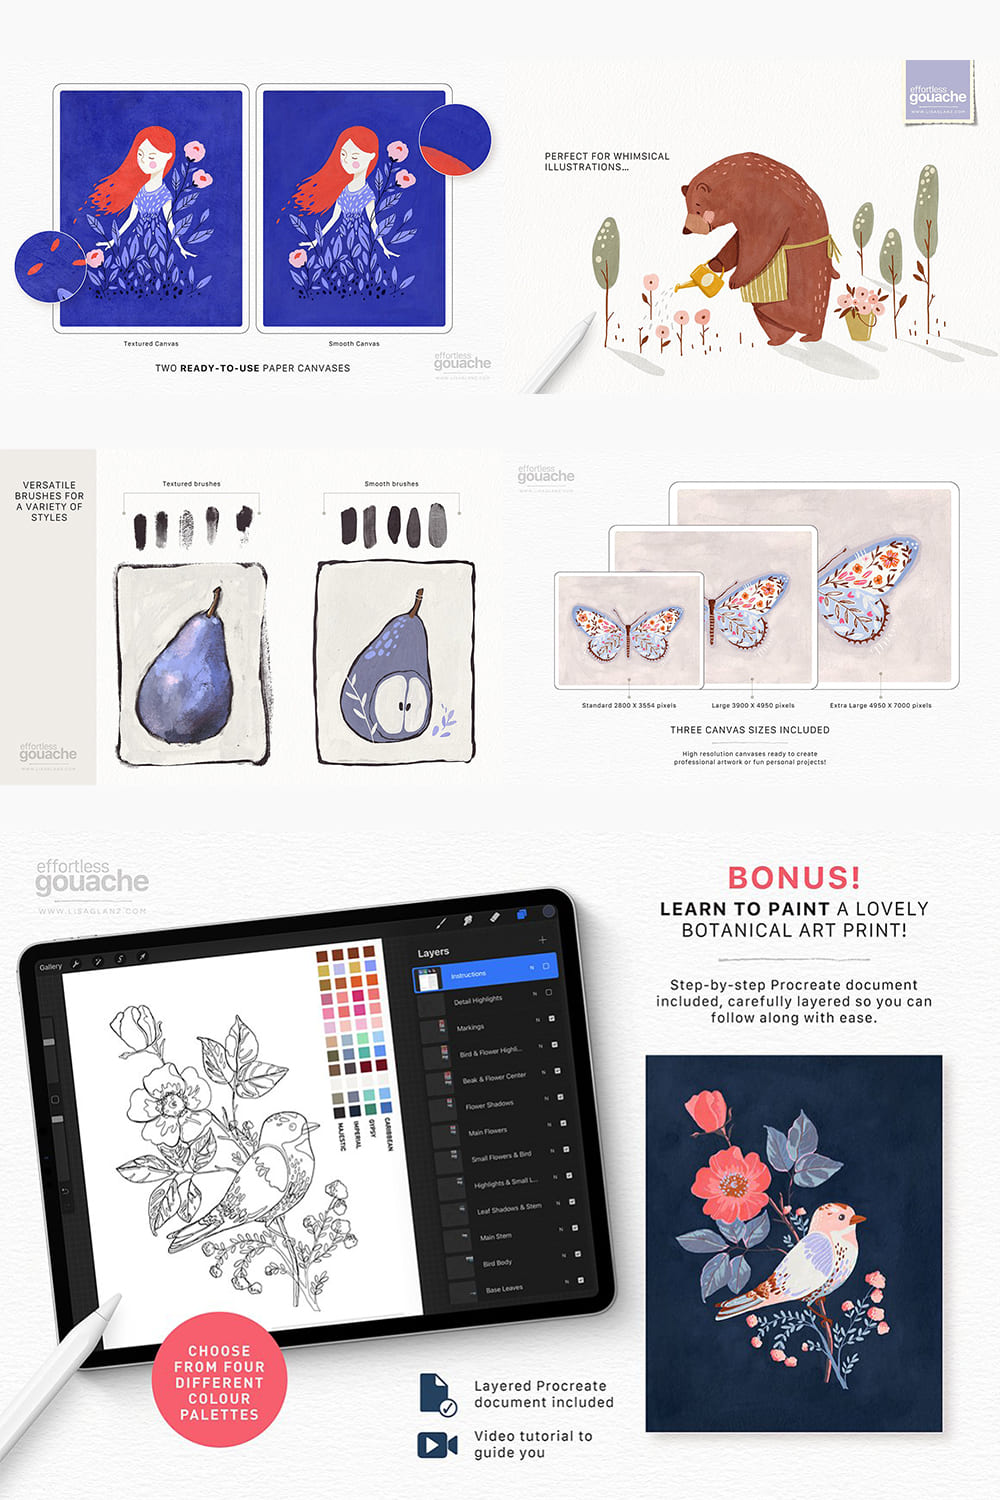 Gouache Brushes For Procreate - Illustrations And Bonus Preview!